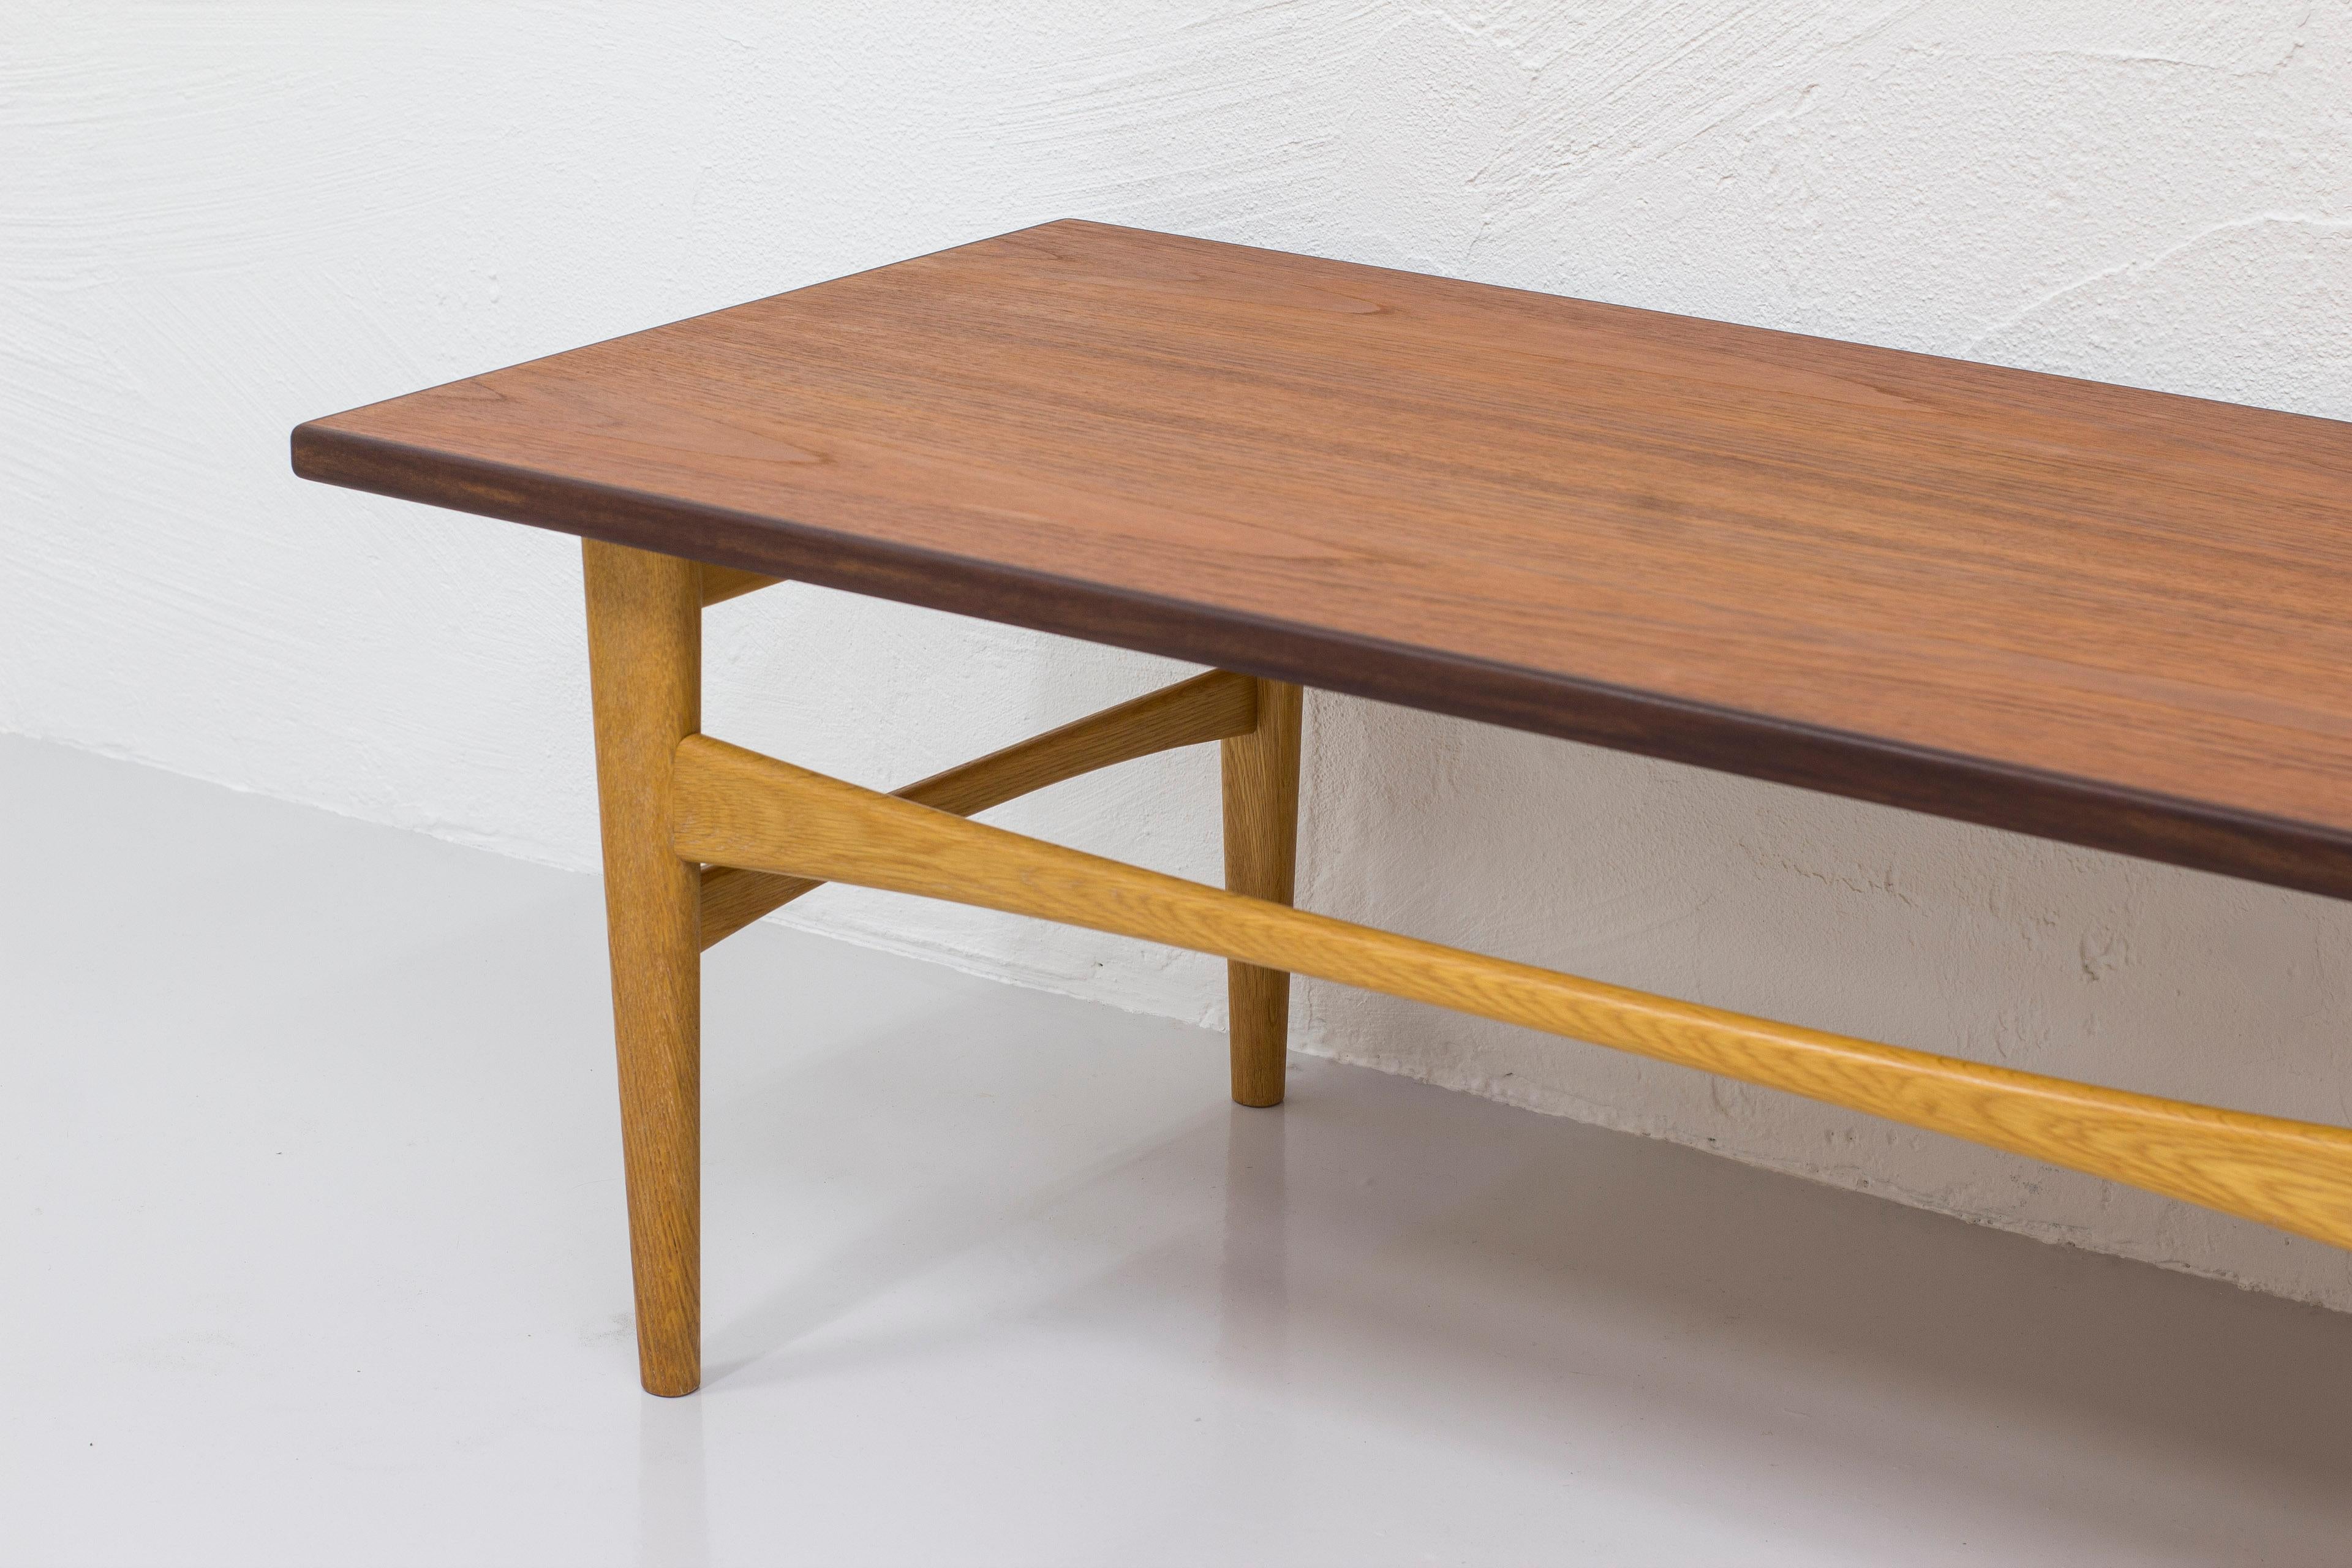 Teak and Oak Bench or Table by Eric Johansson for Abra, Sweden, 1950s For Sale 1